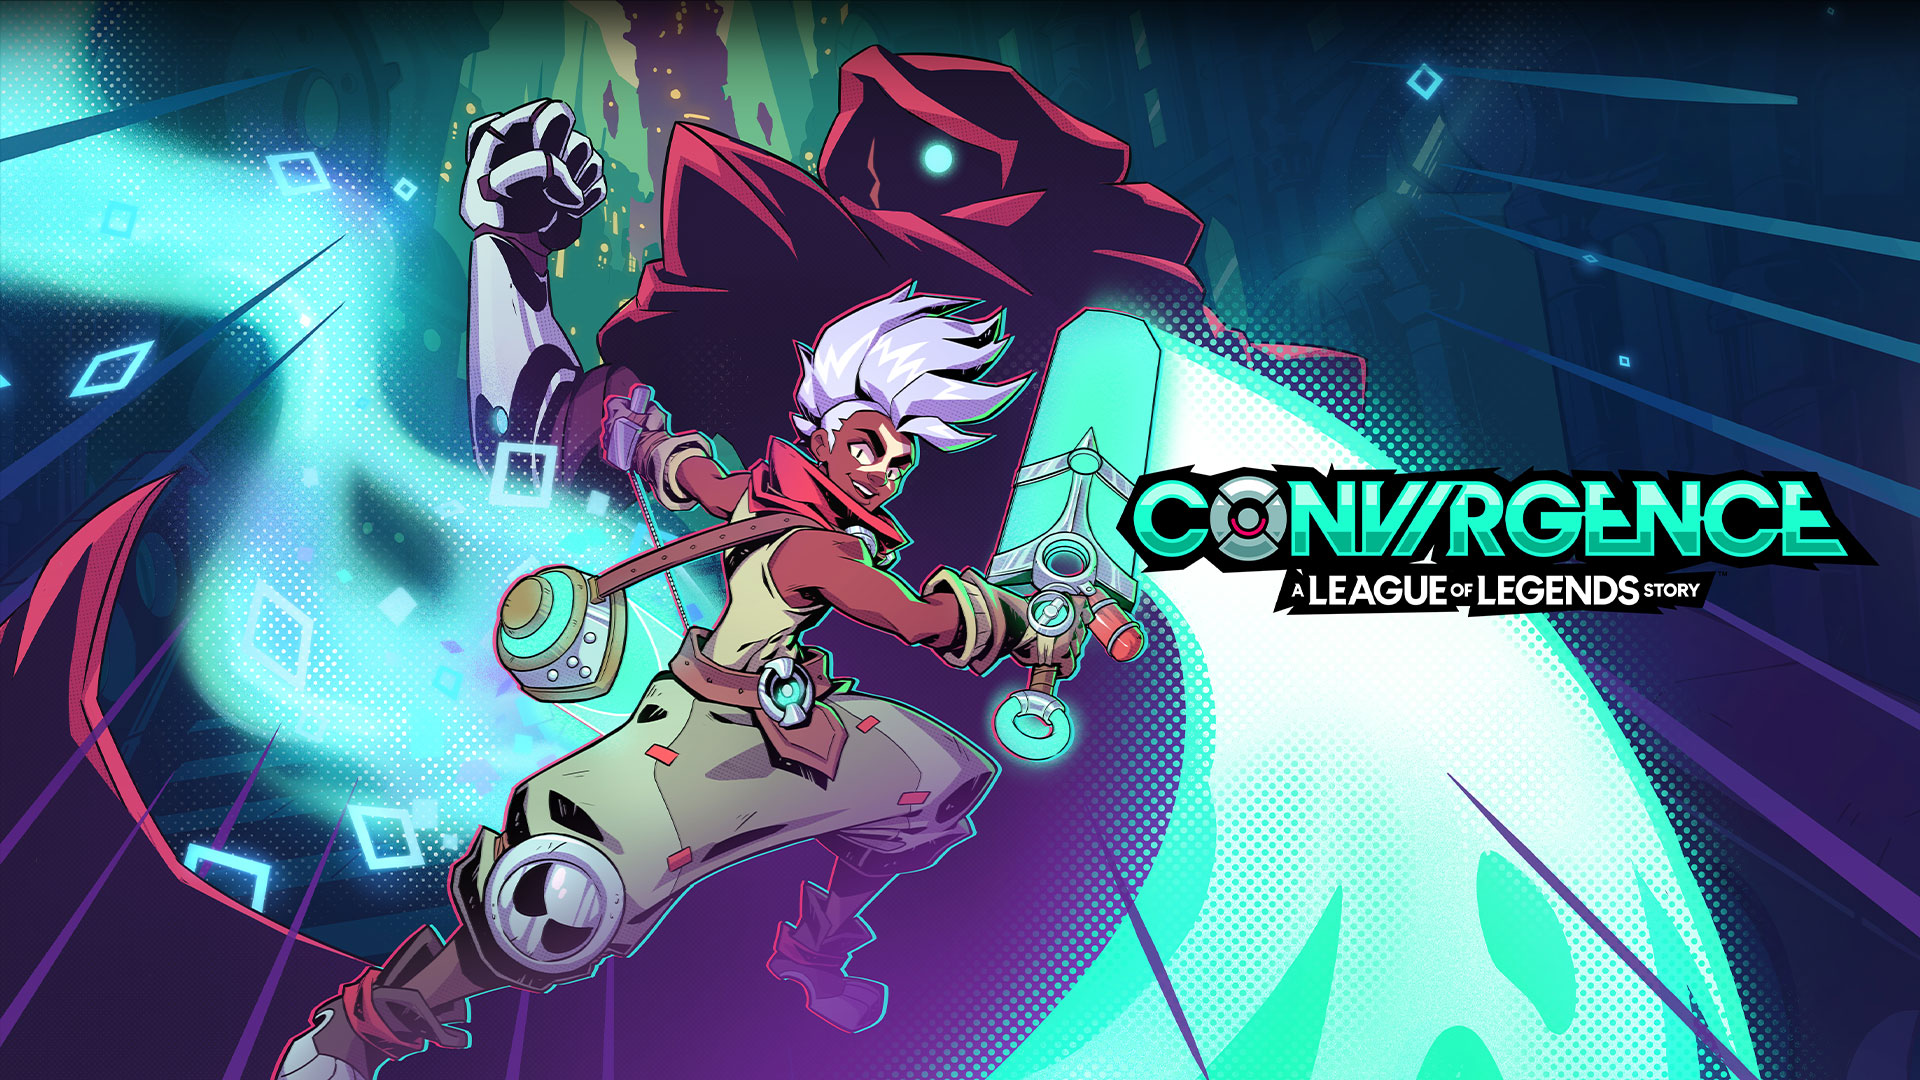 Convergence. A League of Legends Story. Ekko holding a sword and a hooded figure behind him